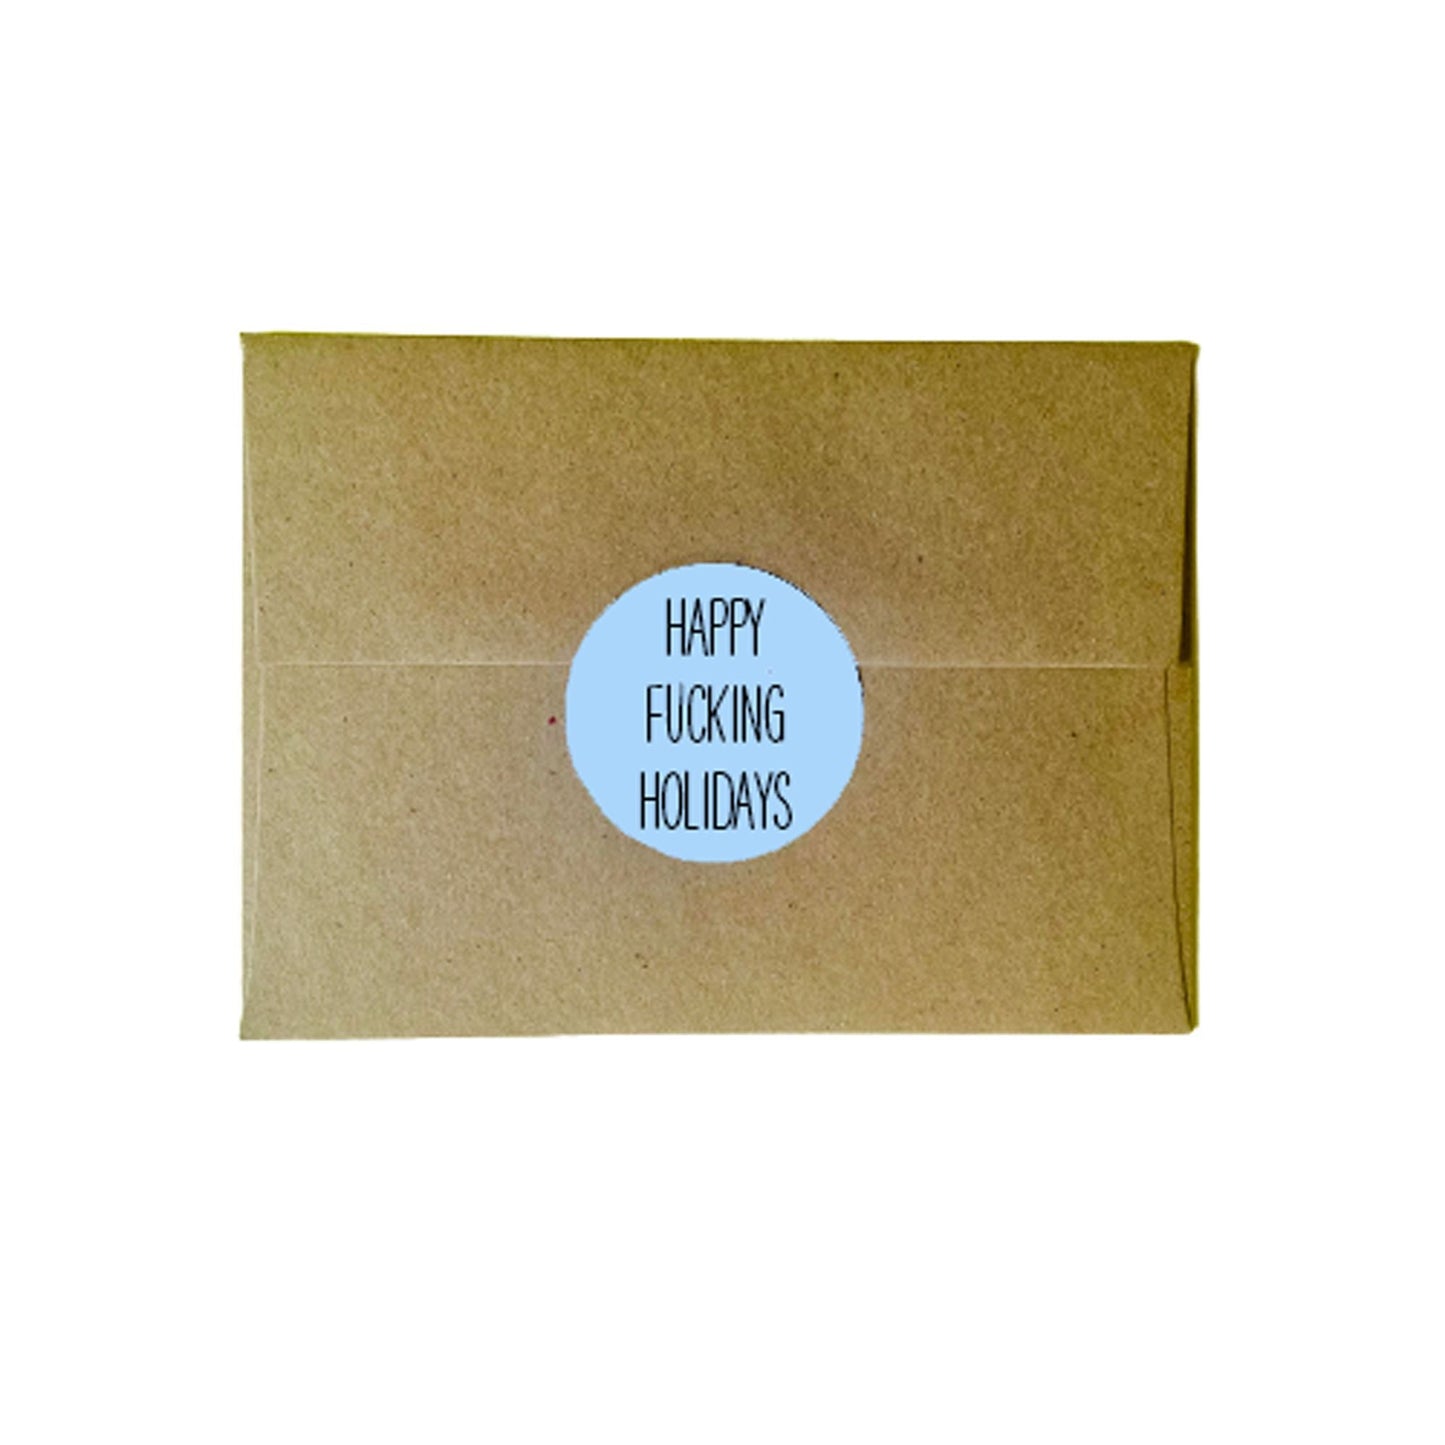 Load image into Gallery viewer, Happy Fucking Holidays Envelope Sticker-Crimson and Clover Studio
